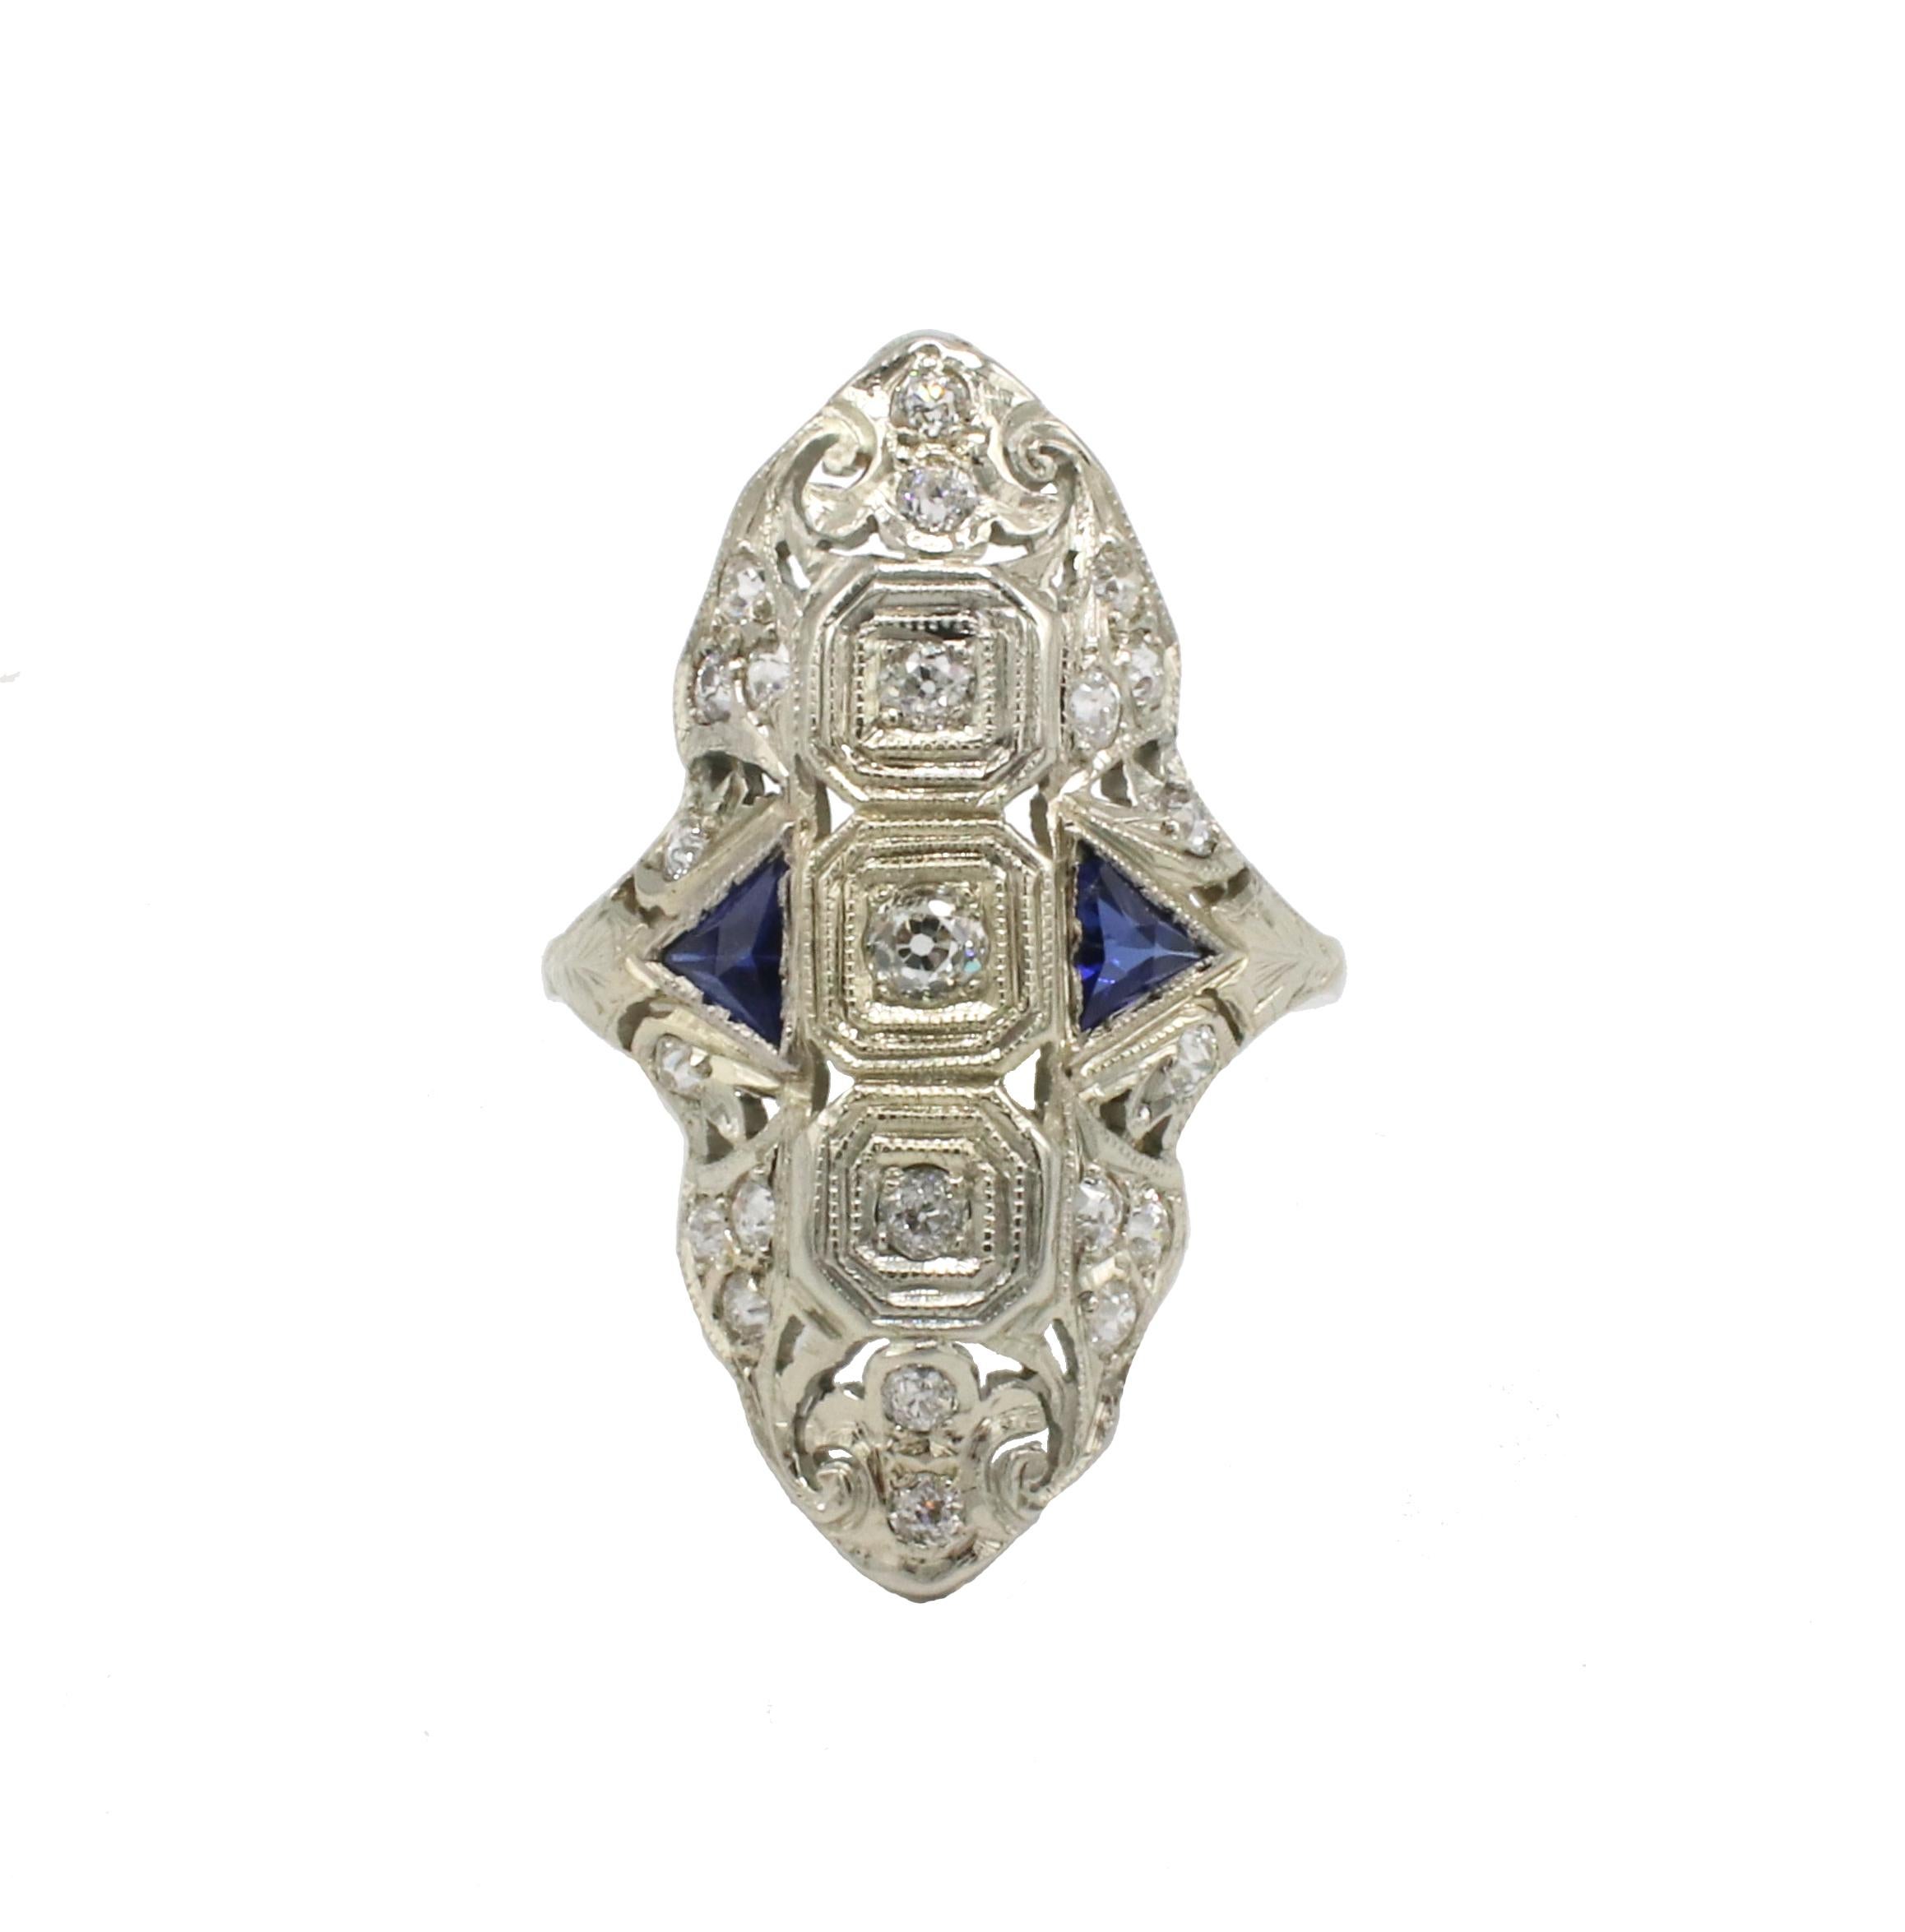 Antique White Gold Old European Cut Natural Diamond & Blue Sapphire Navette Ring 
Metal: 18k white gold
Weight: 4.96 grams
Diamonds: Approx. .75 CTW H-I VS old European cut natural diamonds
Top: 30 x 18mm
Size: 6 (US)